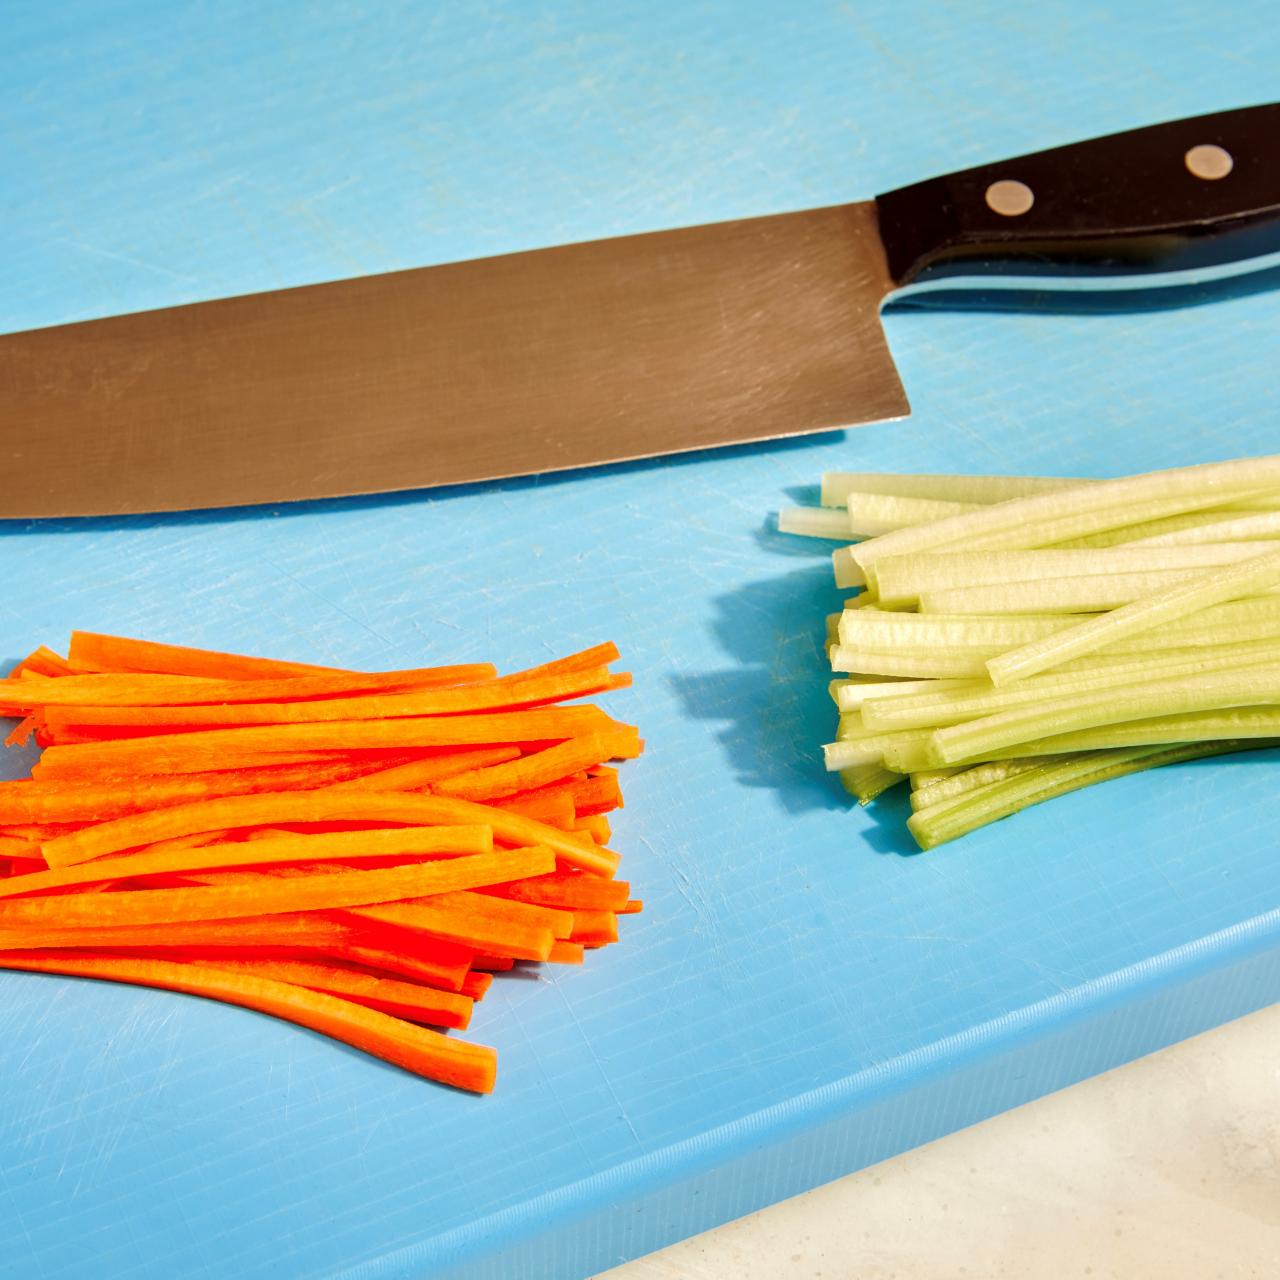 Preserve Your Fingers: Vegetable Cutting Knife Safety